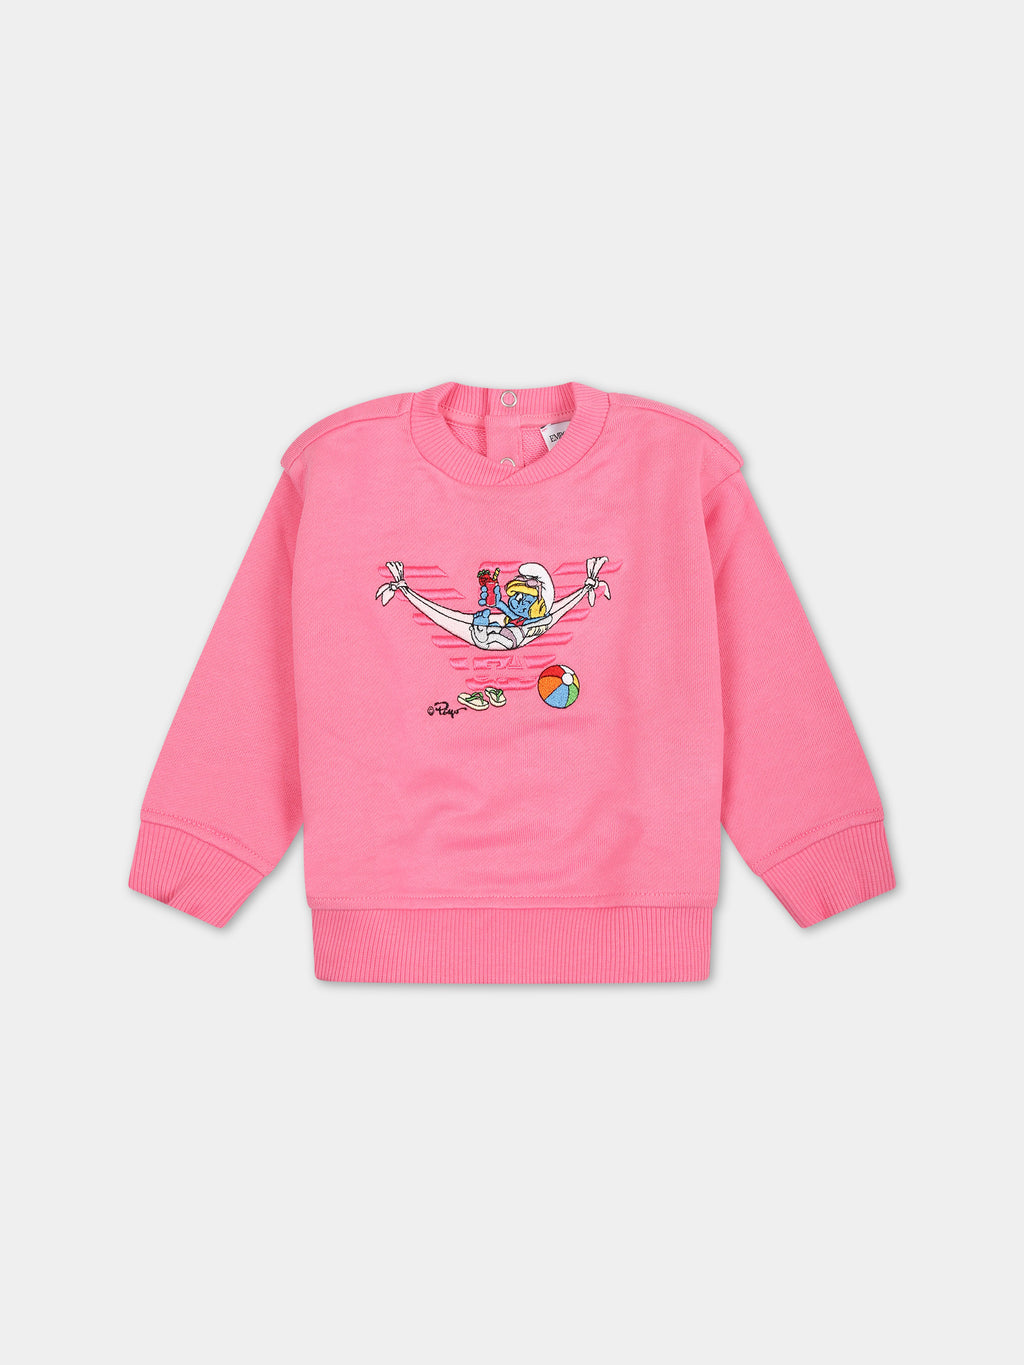 Pink sweatshirt for baby girl with The Smurfs